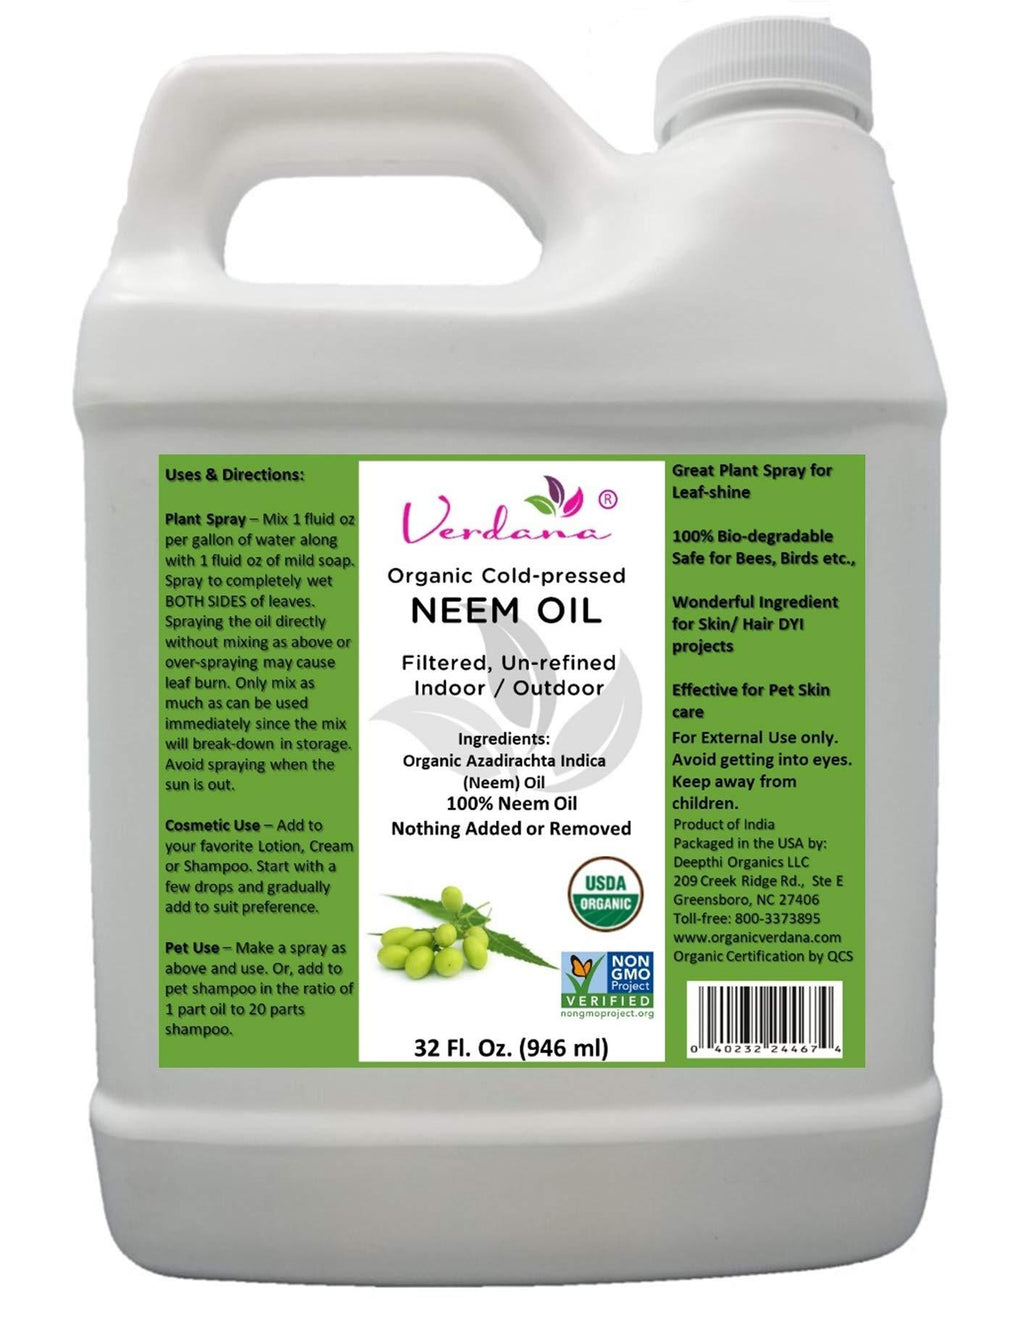 Verdana USDA Organic Cold Pressed Neem Oil 32 Fl. Oz - Non GMO Certified - Unrefined - High Azadirachtin Content - 100% Neem Oil, Nothing Added or Removed - Leafshine, Pet Care, Skin Care, Hair Care - PawsPlanet Australia